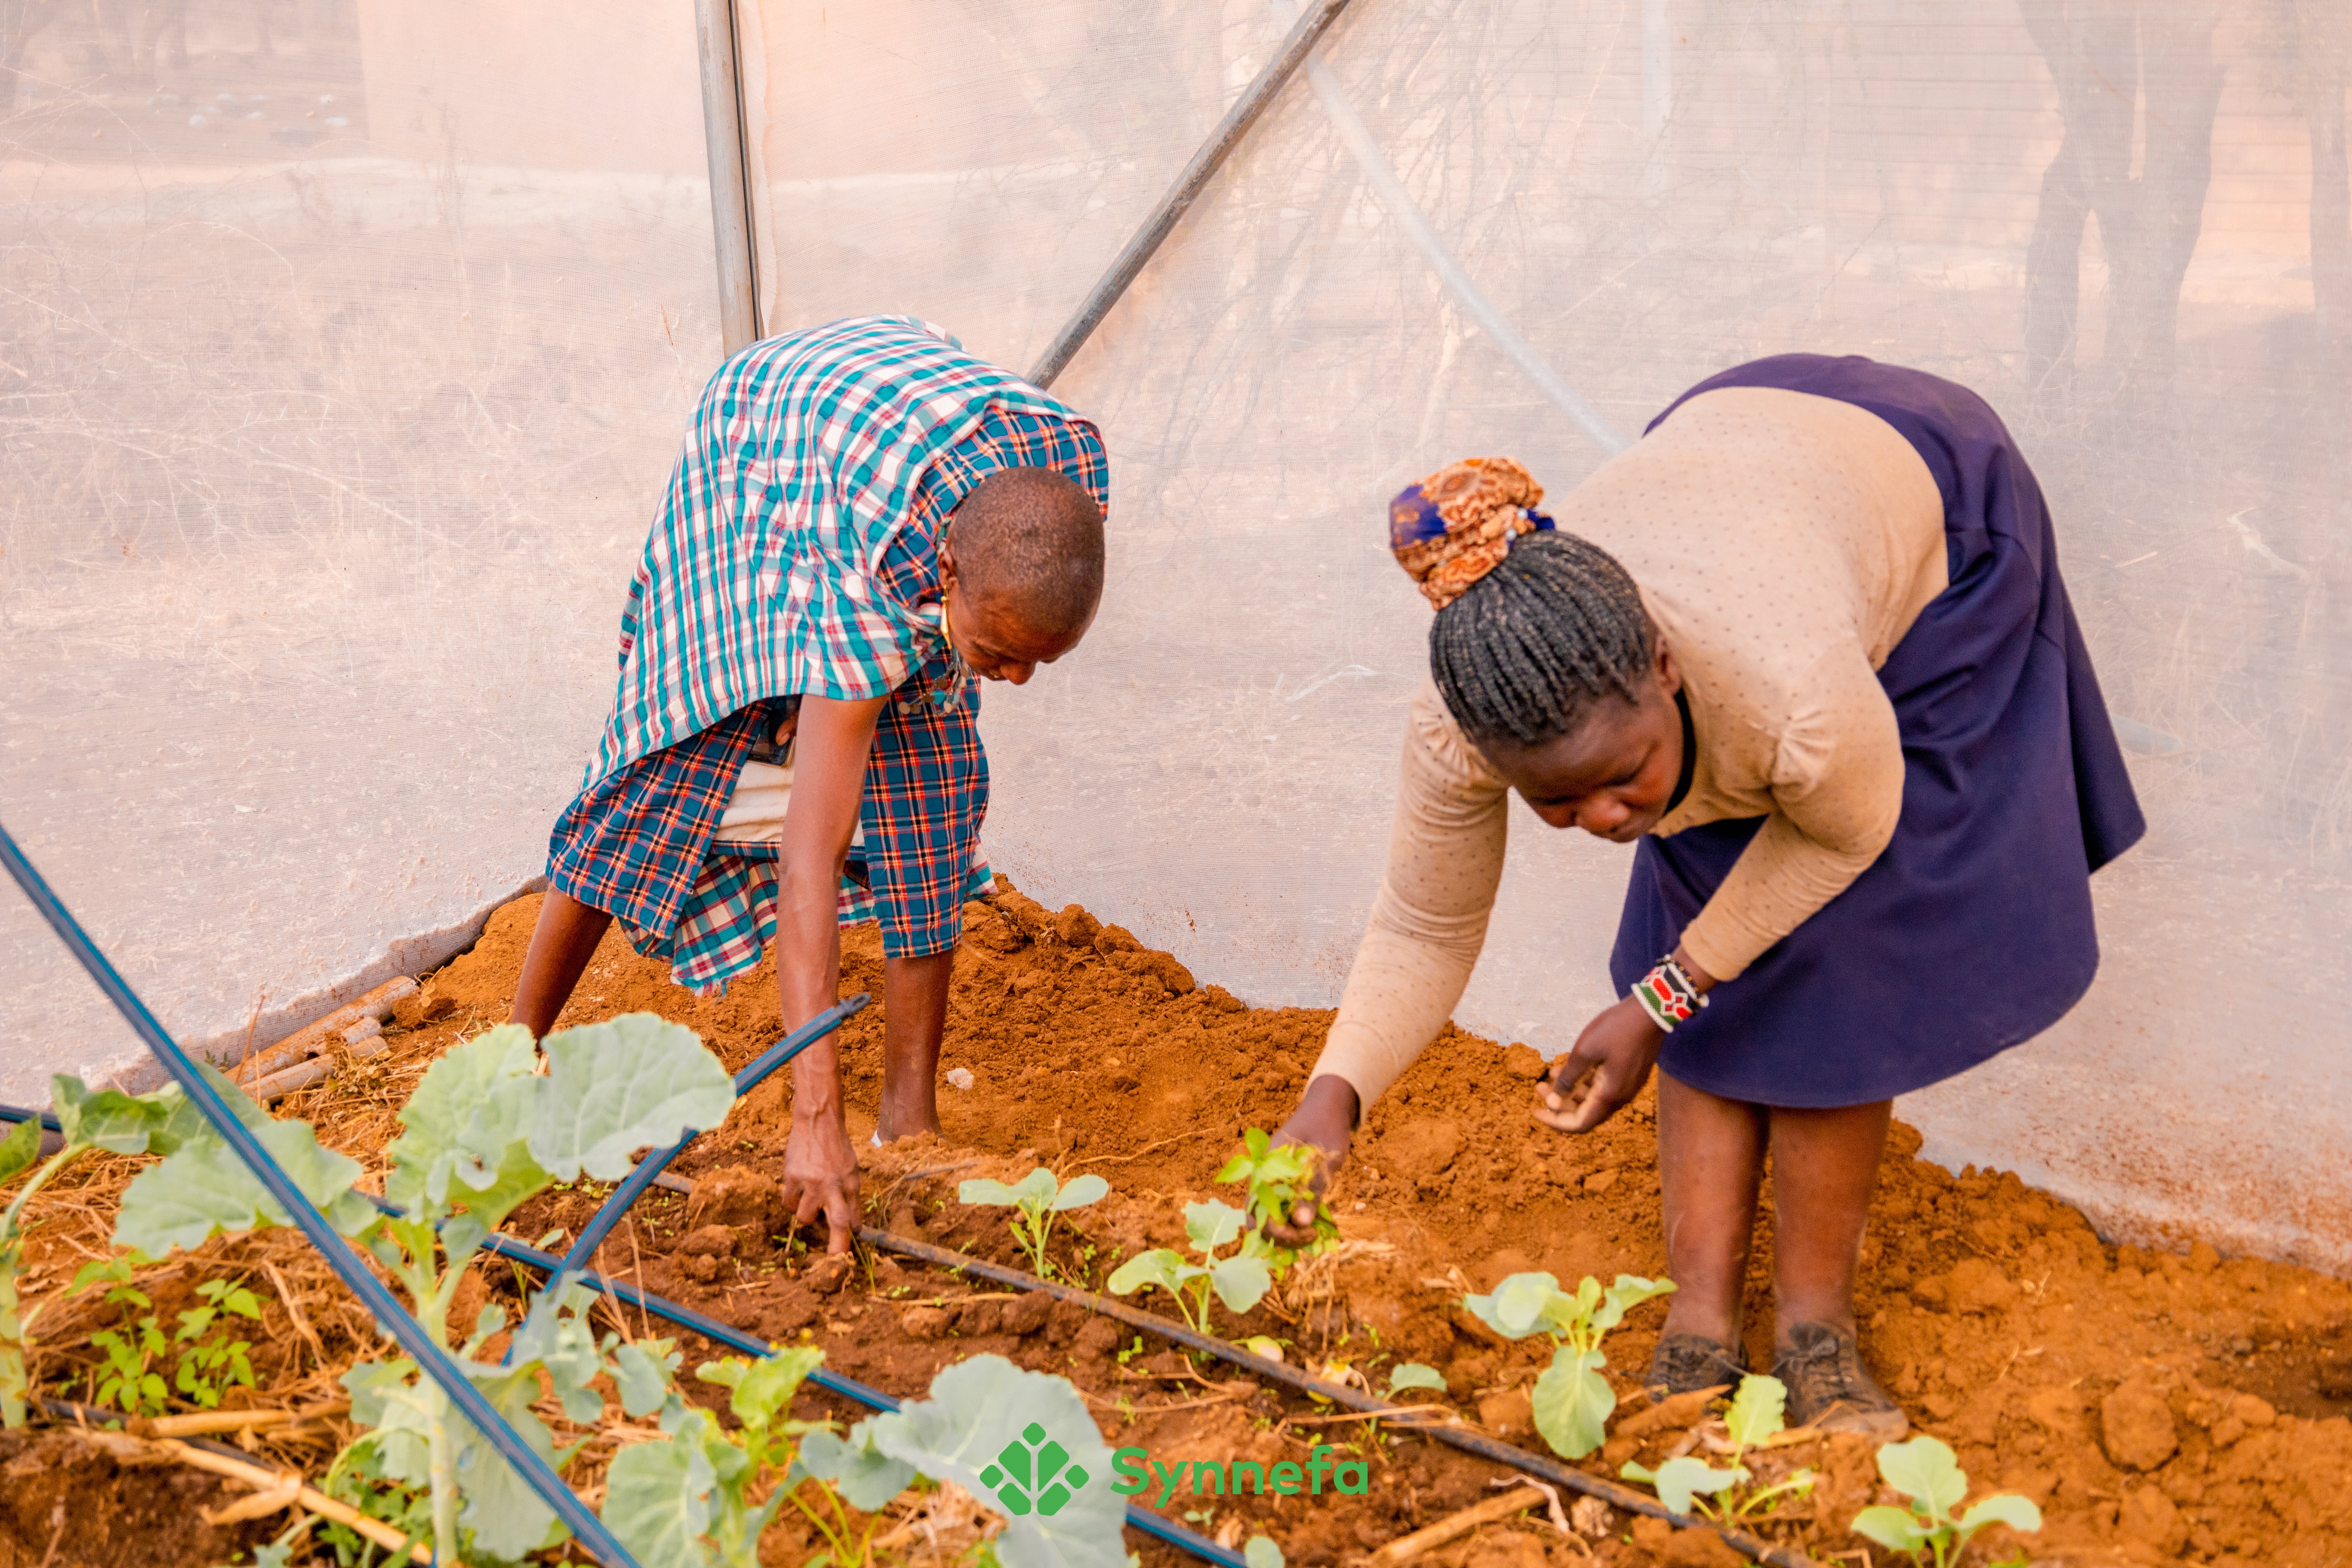 Challenges Women in Agriculture Face and How to Empower Them